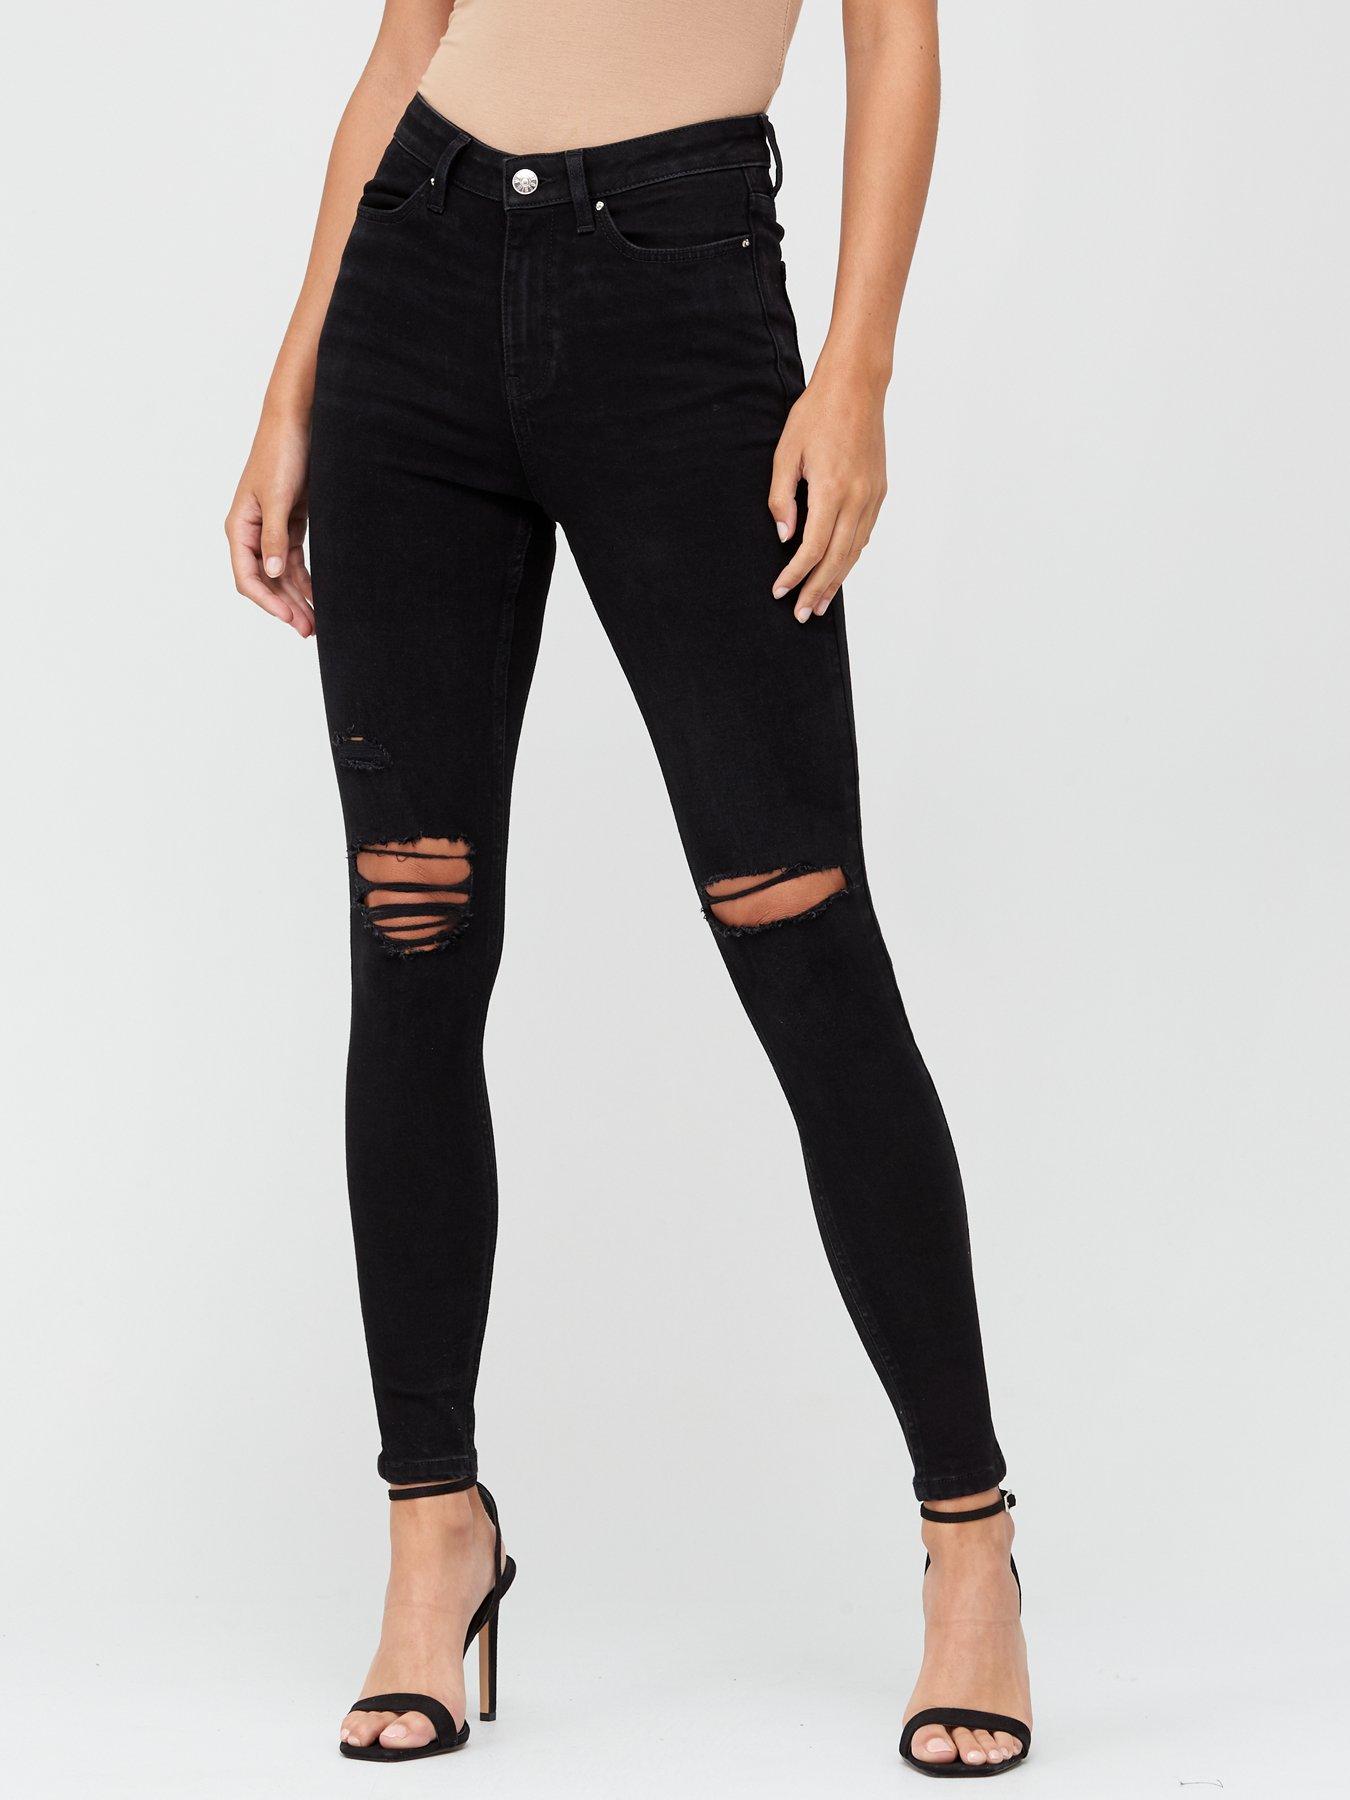 ladies ripped jeans uk